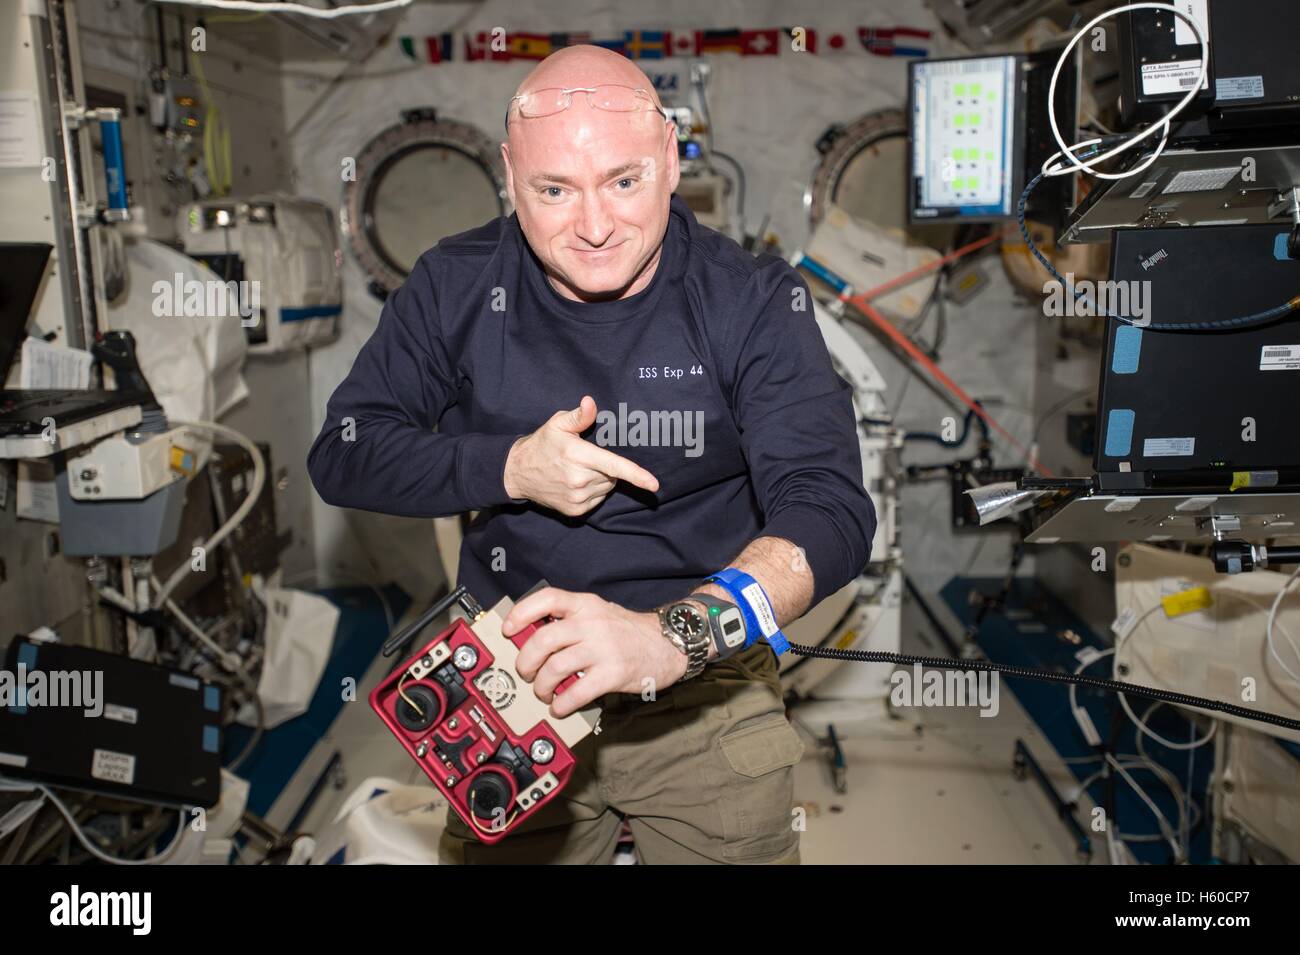 NASA International Space Station Expedition 44 mission prime crew astronaut Scott Kelly operates a SPHERES satellite used for spacecraft docking and maneuvers September 10, 2015 while in Earth orbit. Stock Photo